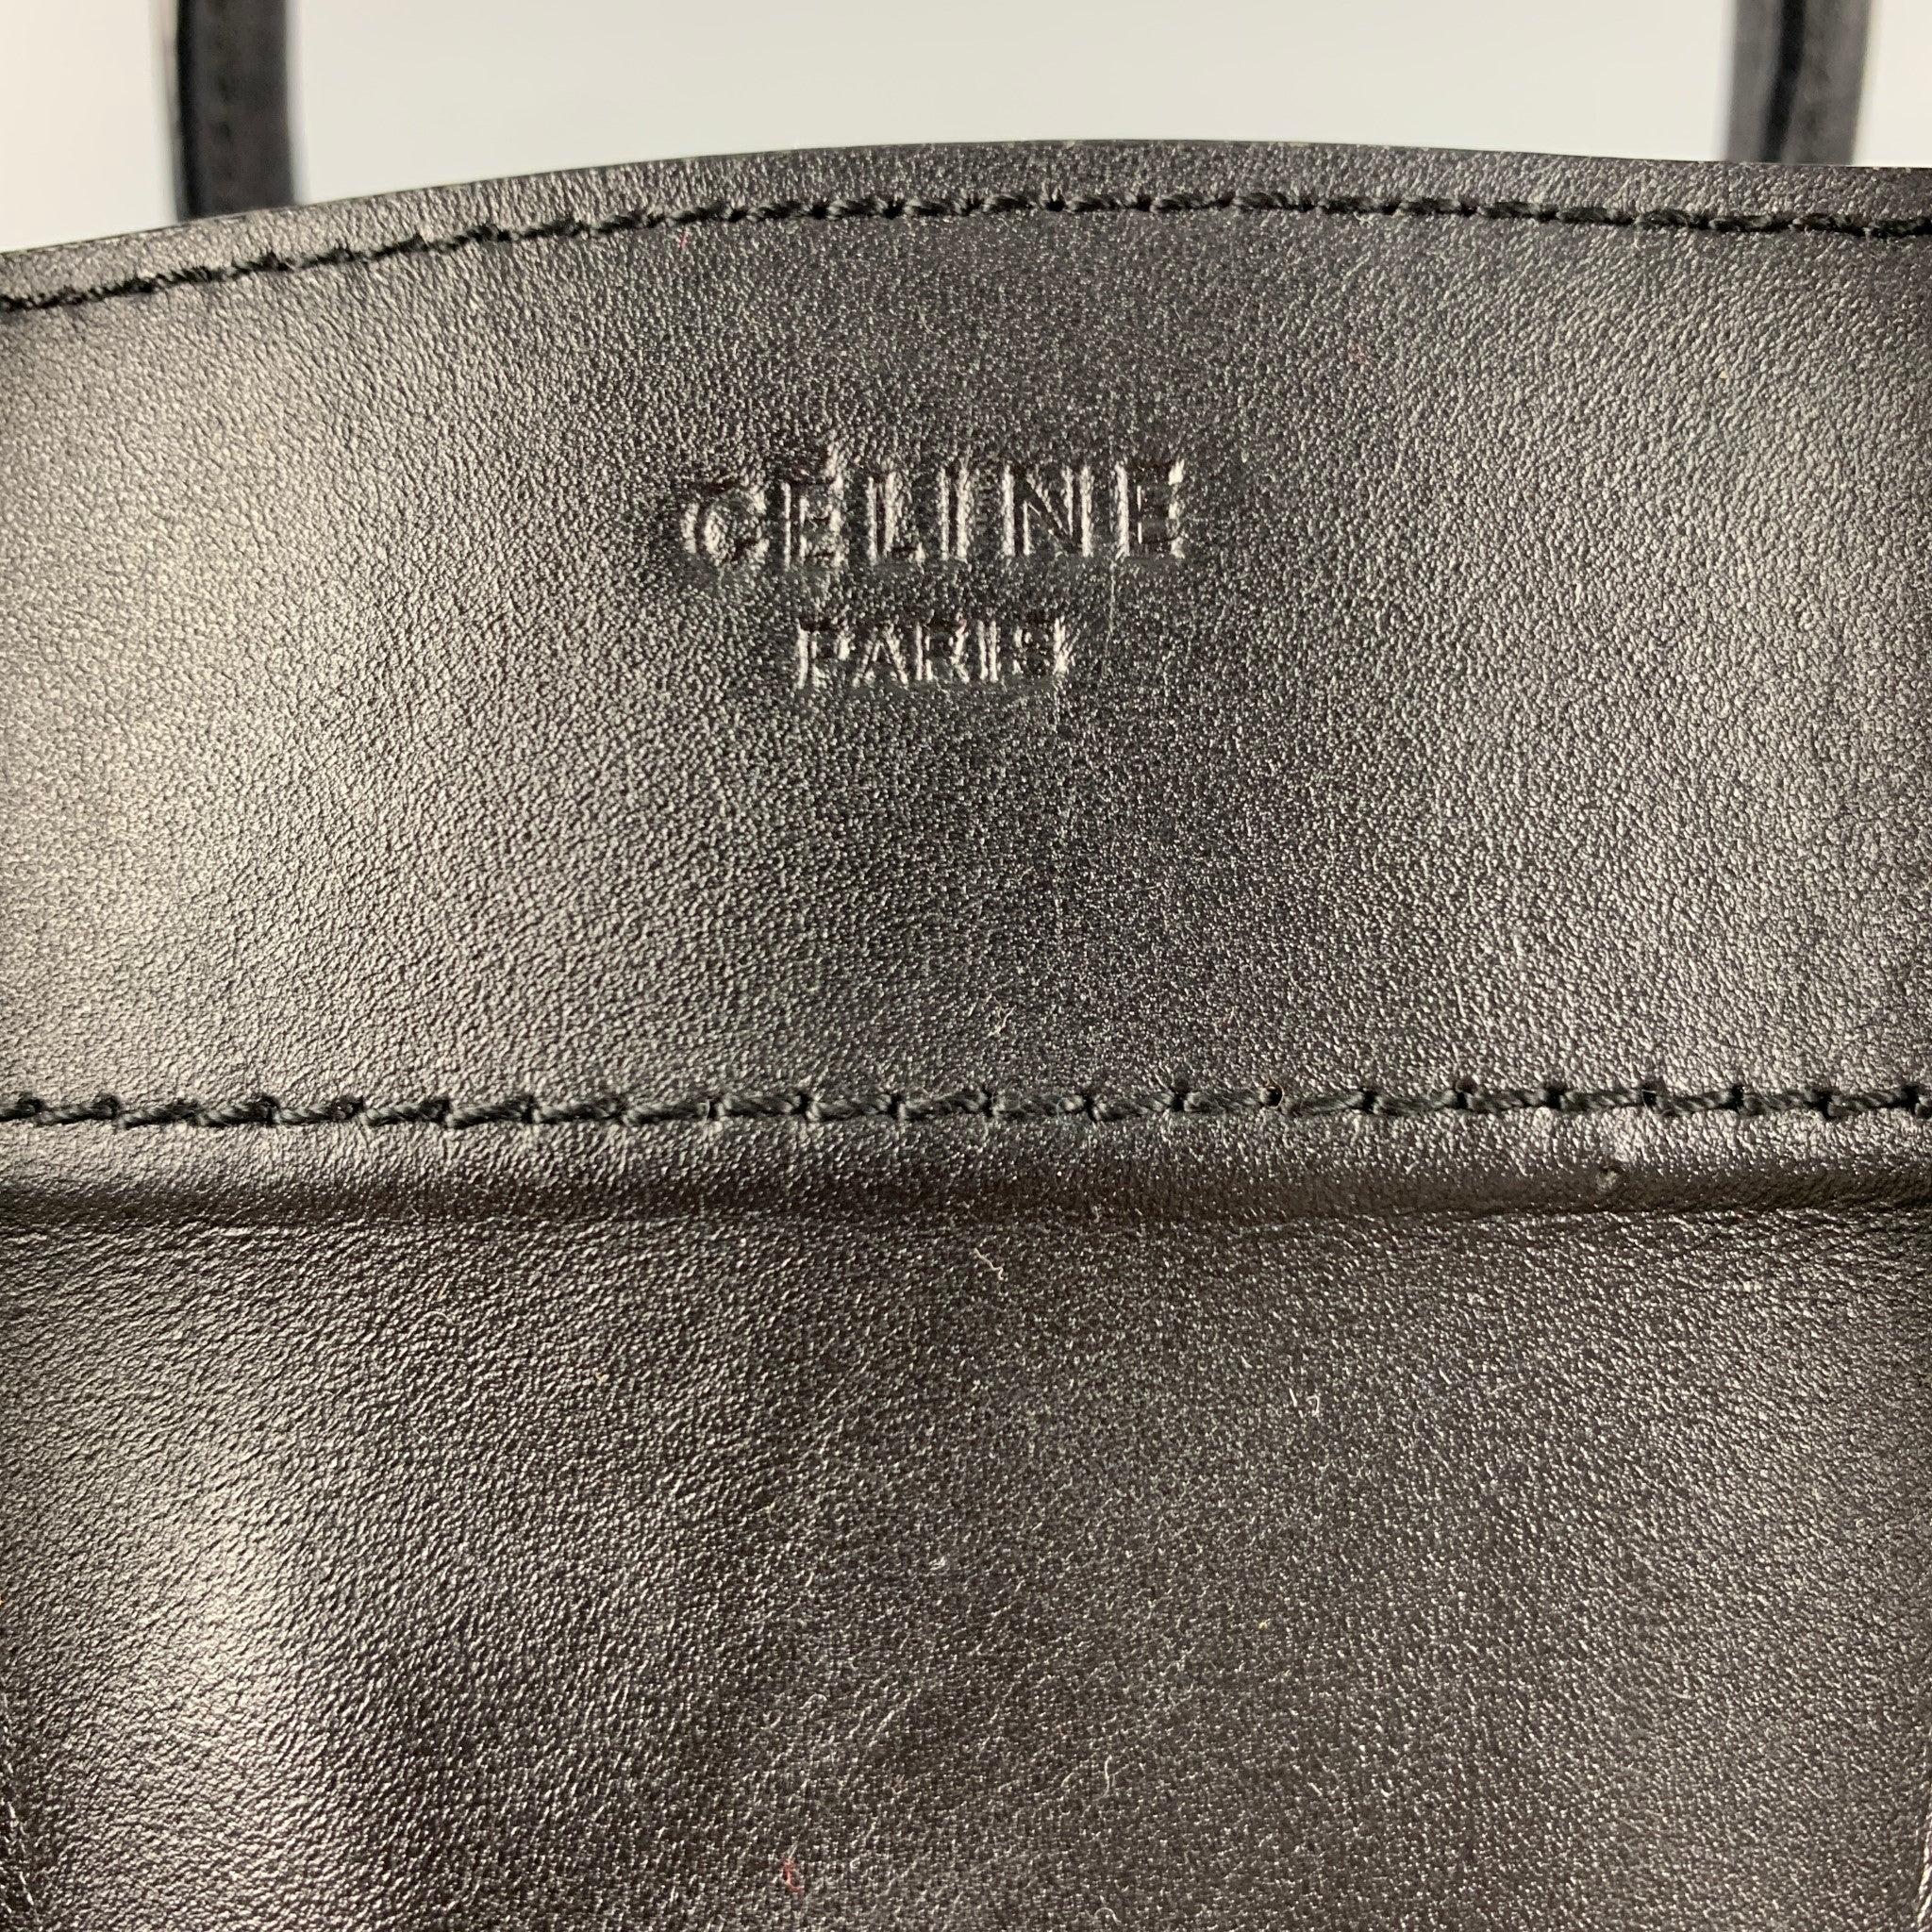 CELINE handbag comes in black calfskin leather featuring rolled leather top handles and decorative leather detailing, black suede interior with zipper and patch pockets.Good Pre-Owned Condition. Moderate signs of wear, and missing zipper pull on the